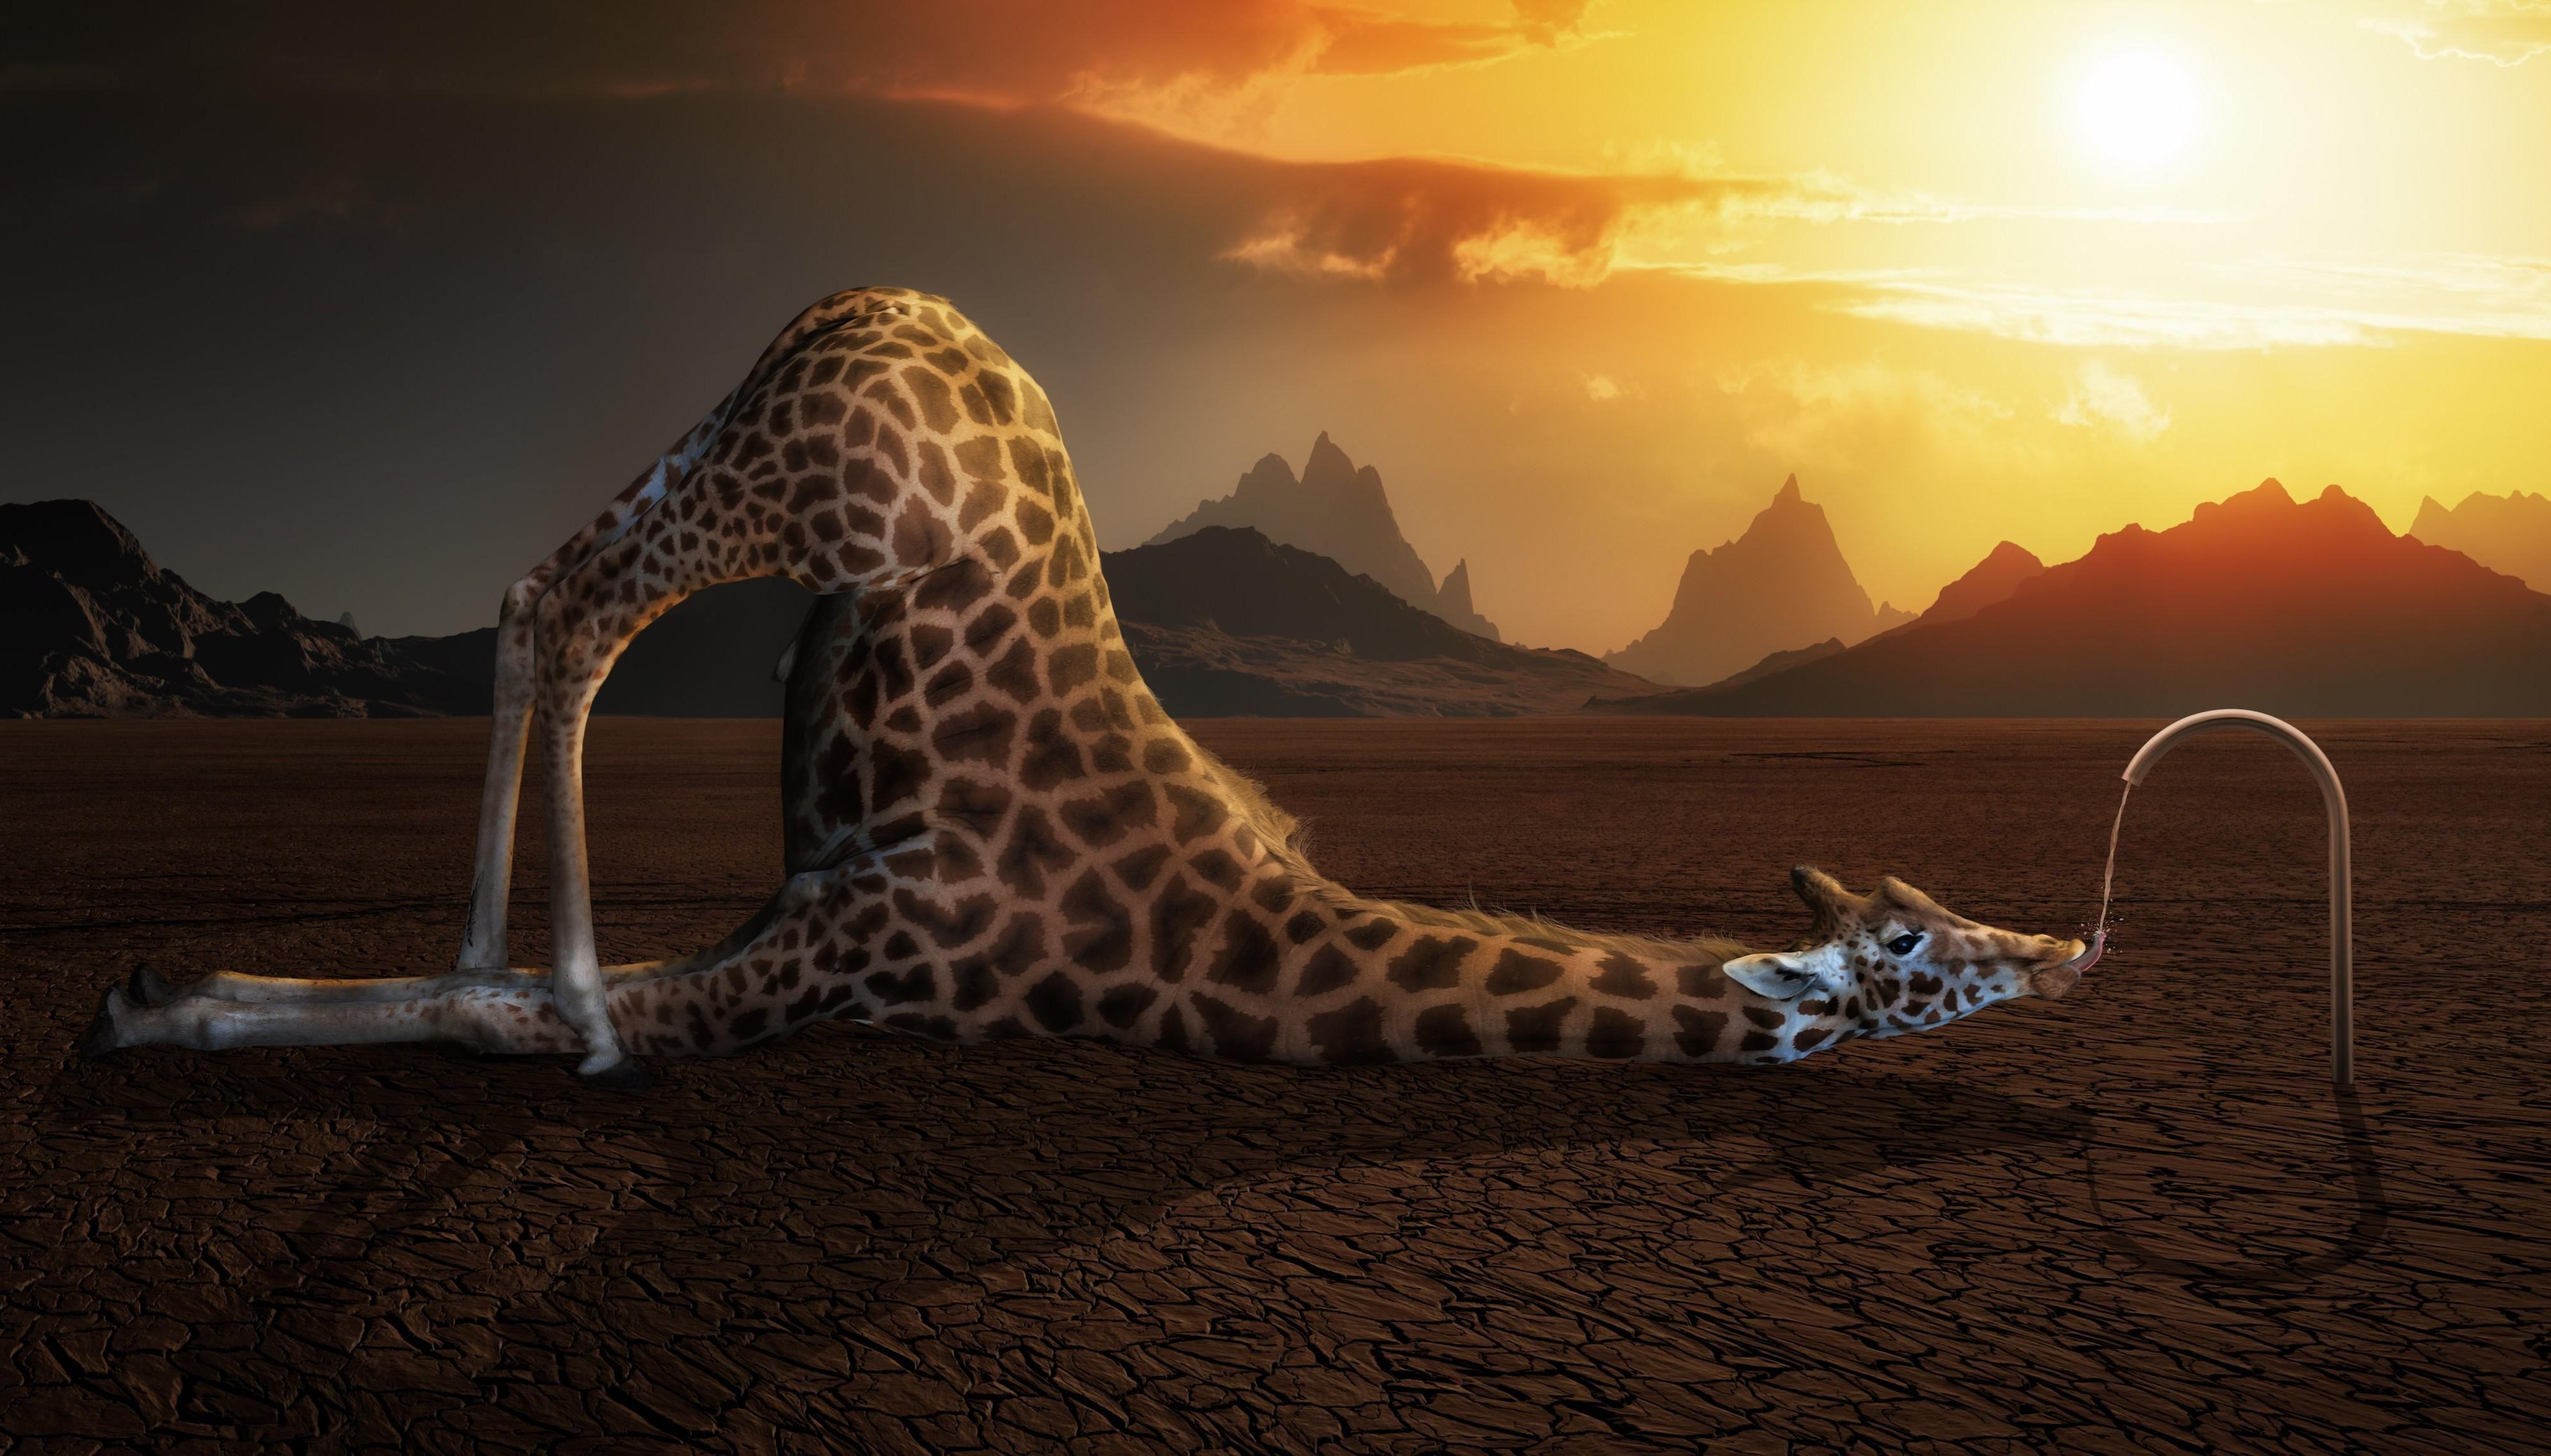 Funny Giraffe Wallpaper Get The Newest Collection Of Funny Giraffe